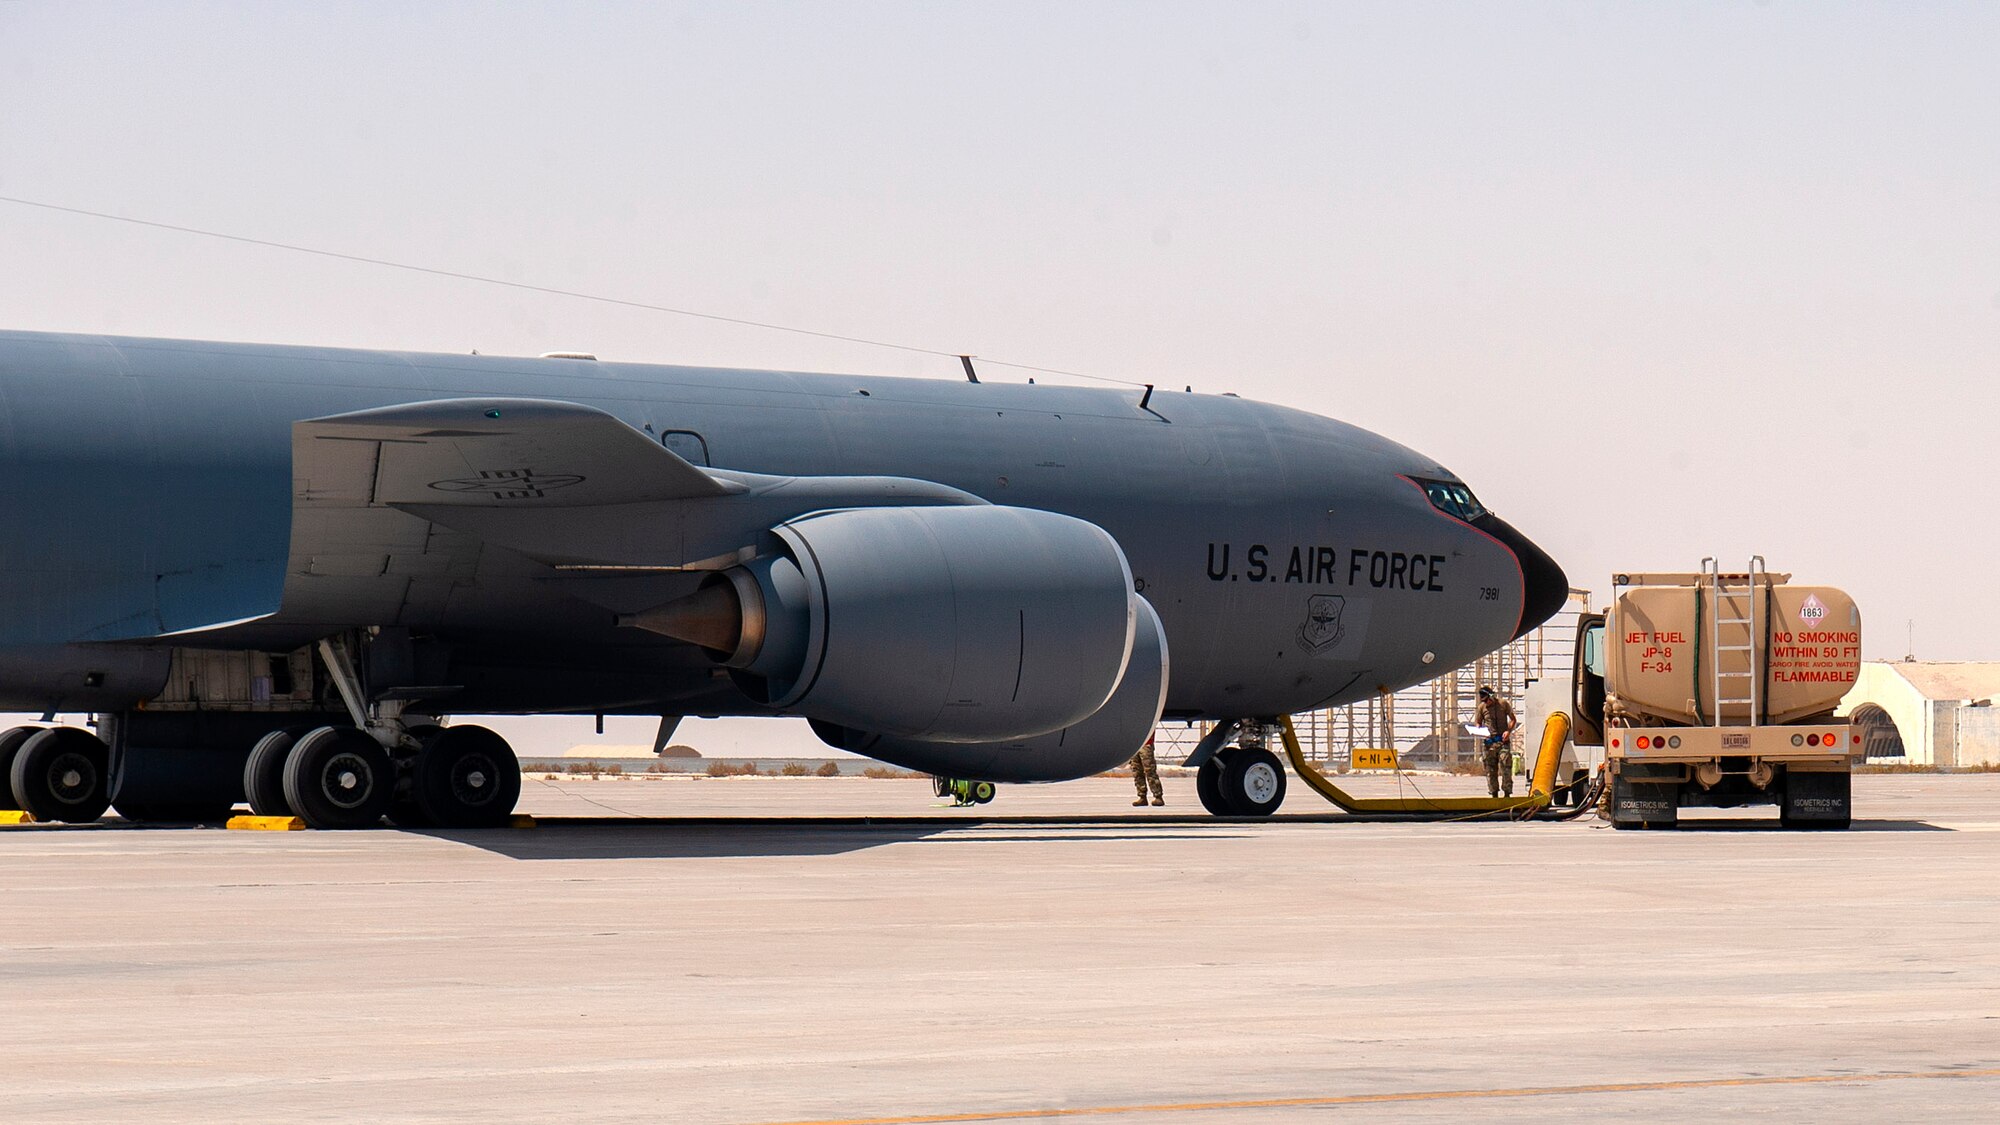 A U.S. Air Force KC-135 Stratotanker aircraft assigned to the 379th Air Expeditionary Wing is refueled during a hot refueling training scenario at Al Udeid Air Base, Qatar, Sept. 21, 2020. Personnel from the 379th Expeditionary Aircraft Maintenance Squadron, 379th Expeditionary Logistics Readiness Squadron and 340th Expeditionary Air Refueling Squadron attended the training. The certification they receive will enable personnel to refuel a KC-135 while one or more engines run.